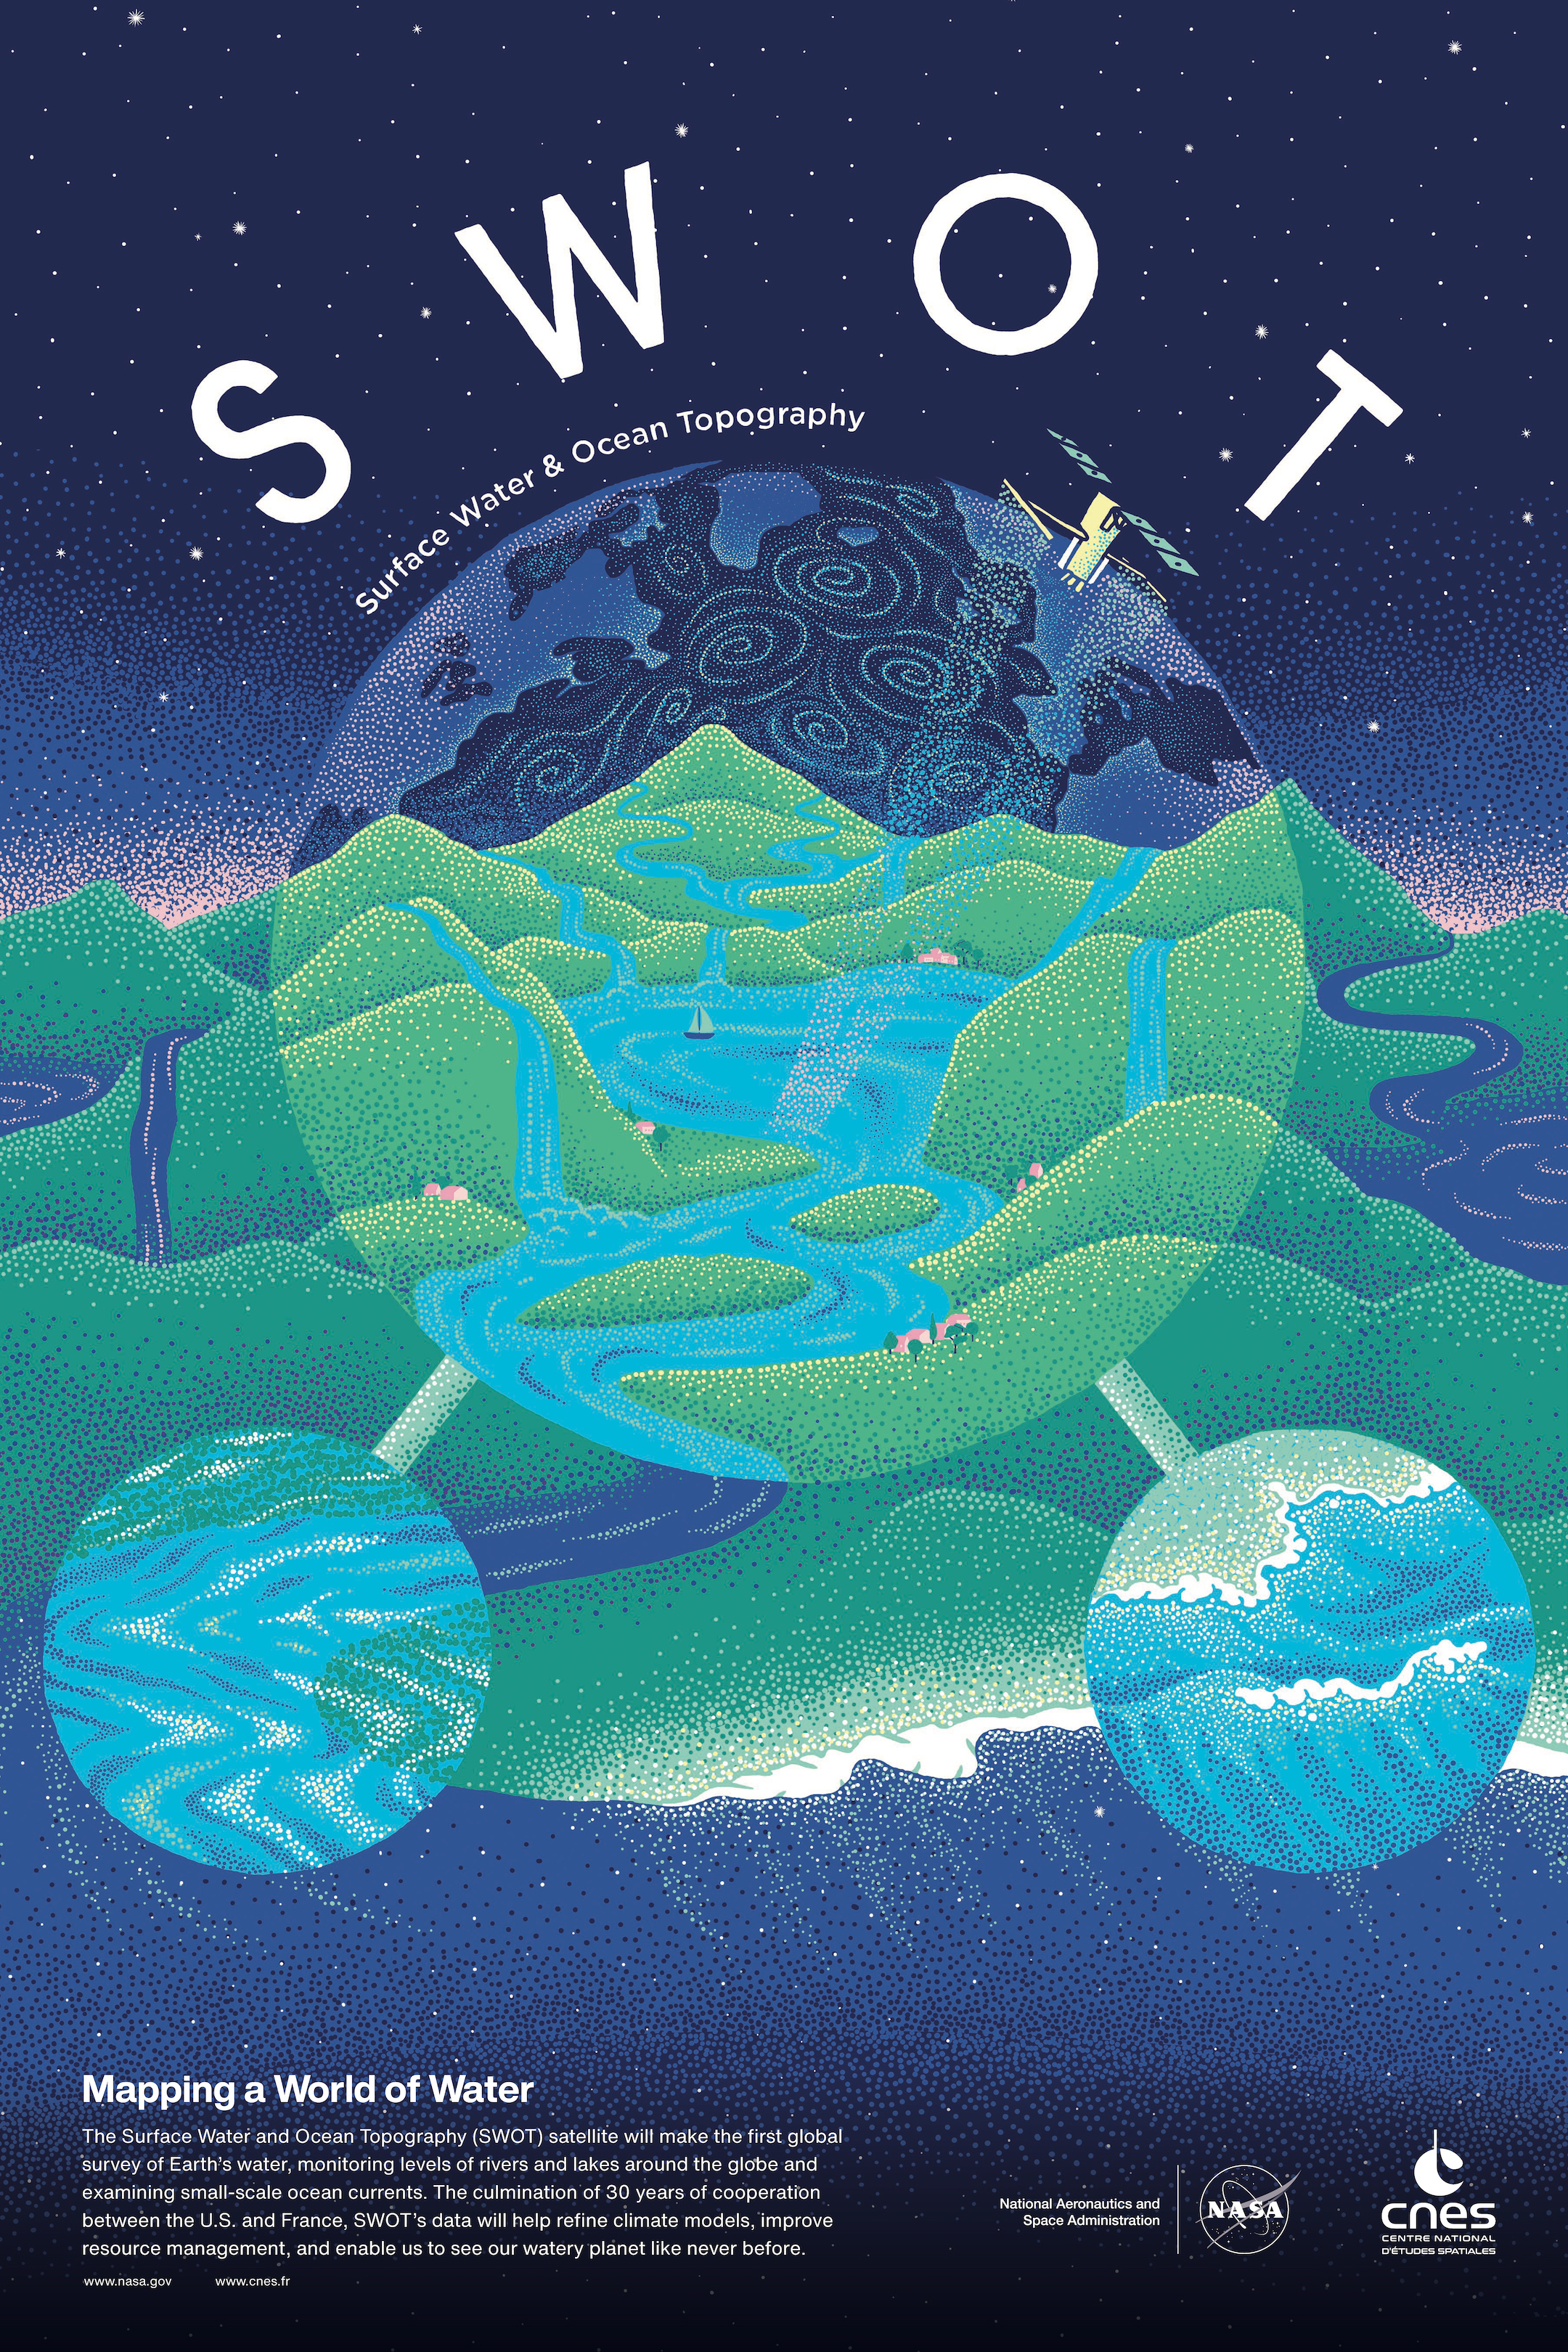 This collaborative mission poster, designed by CNES (French Space Agency), shows the Surface Water and Ocean Topography (SWOT) satellite soaring over an abstract of a water molecule.